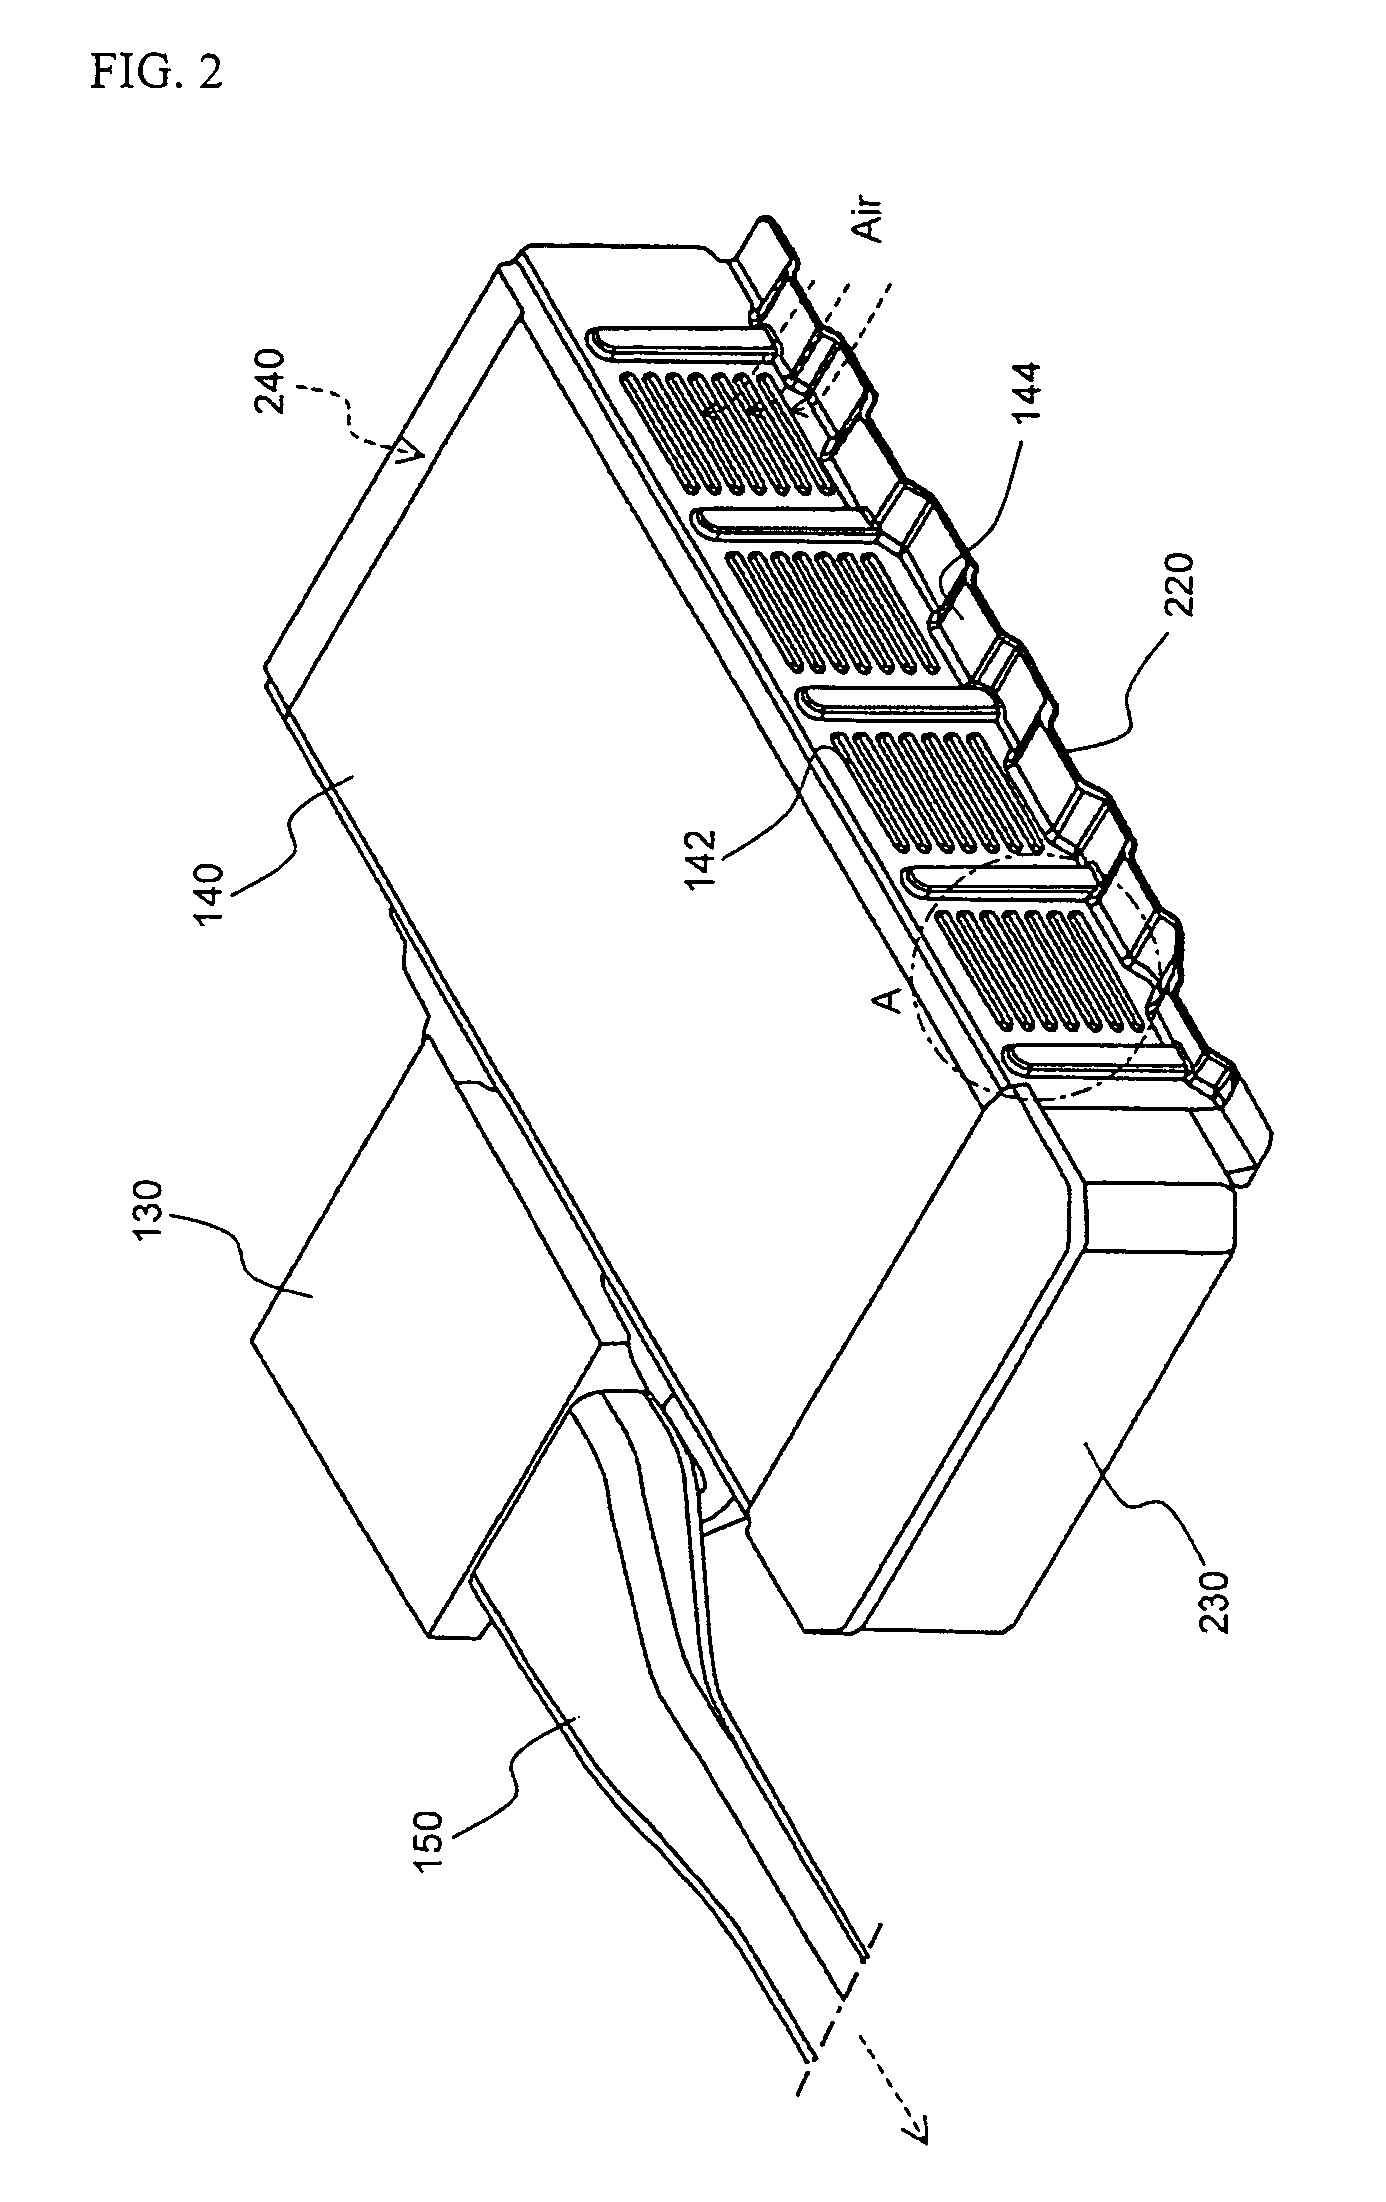 Battery pack cooling system for vehicle